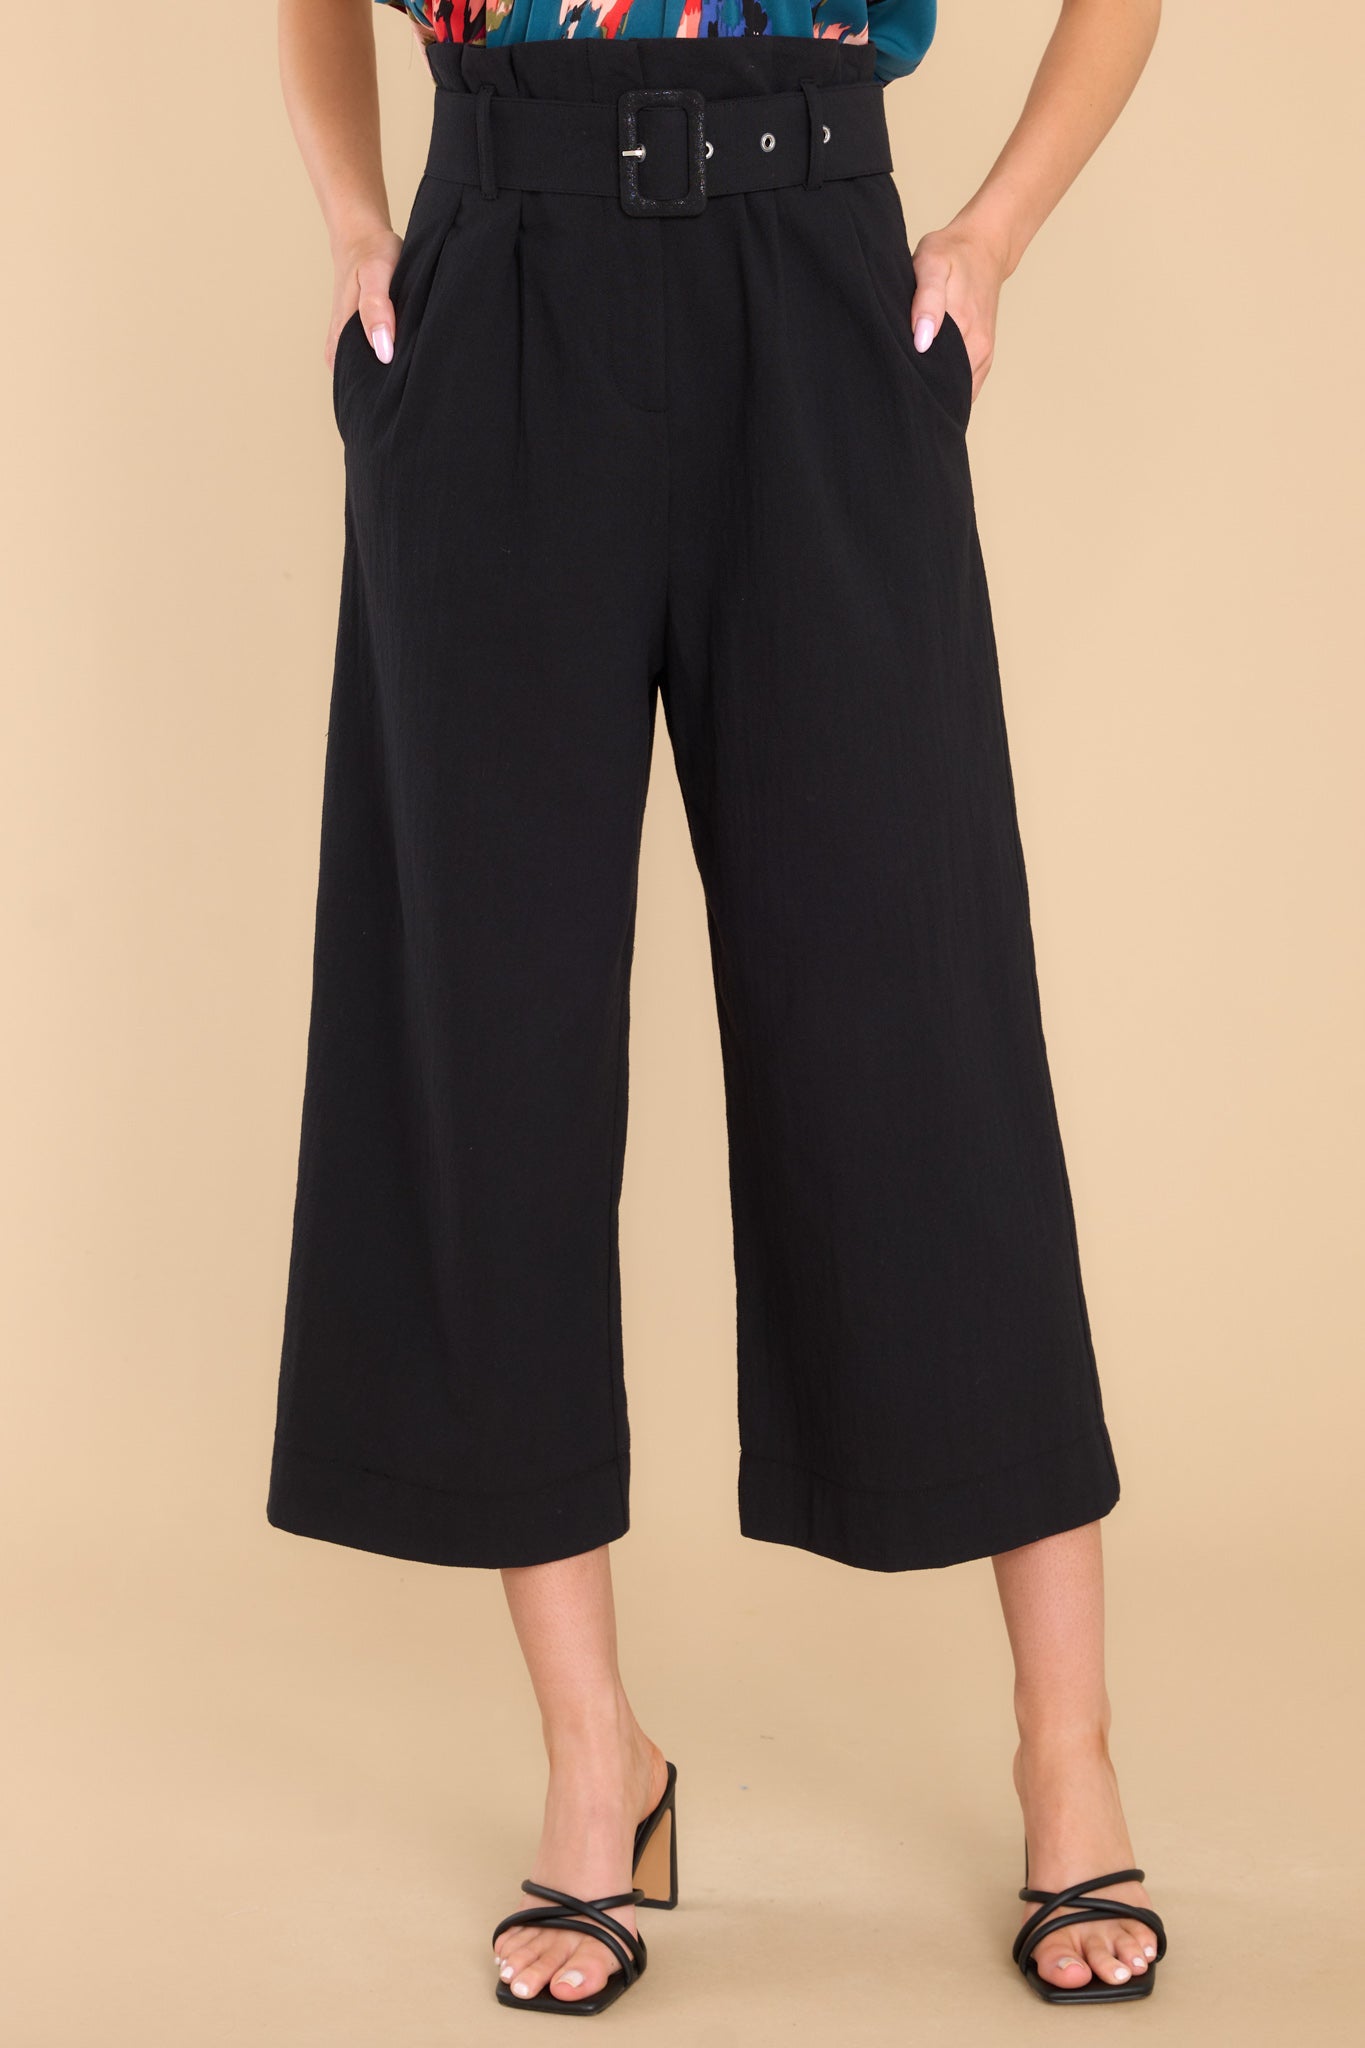 Essential Classy Cropped Black Pants - All Bottoms | Red Dress